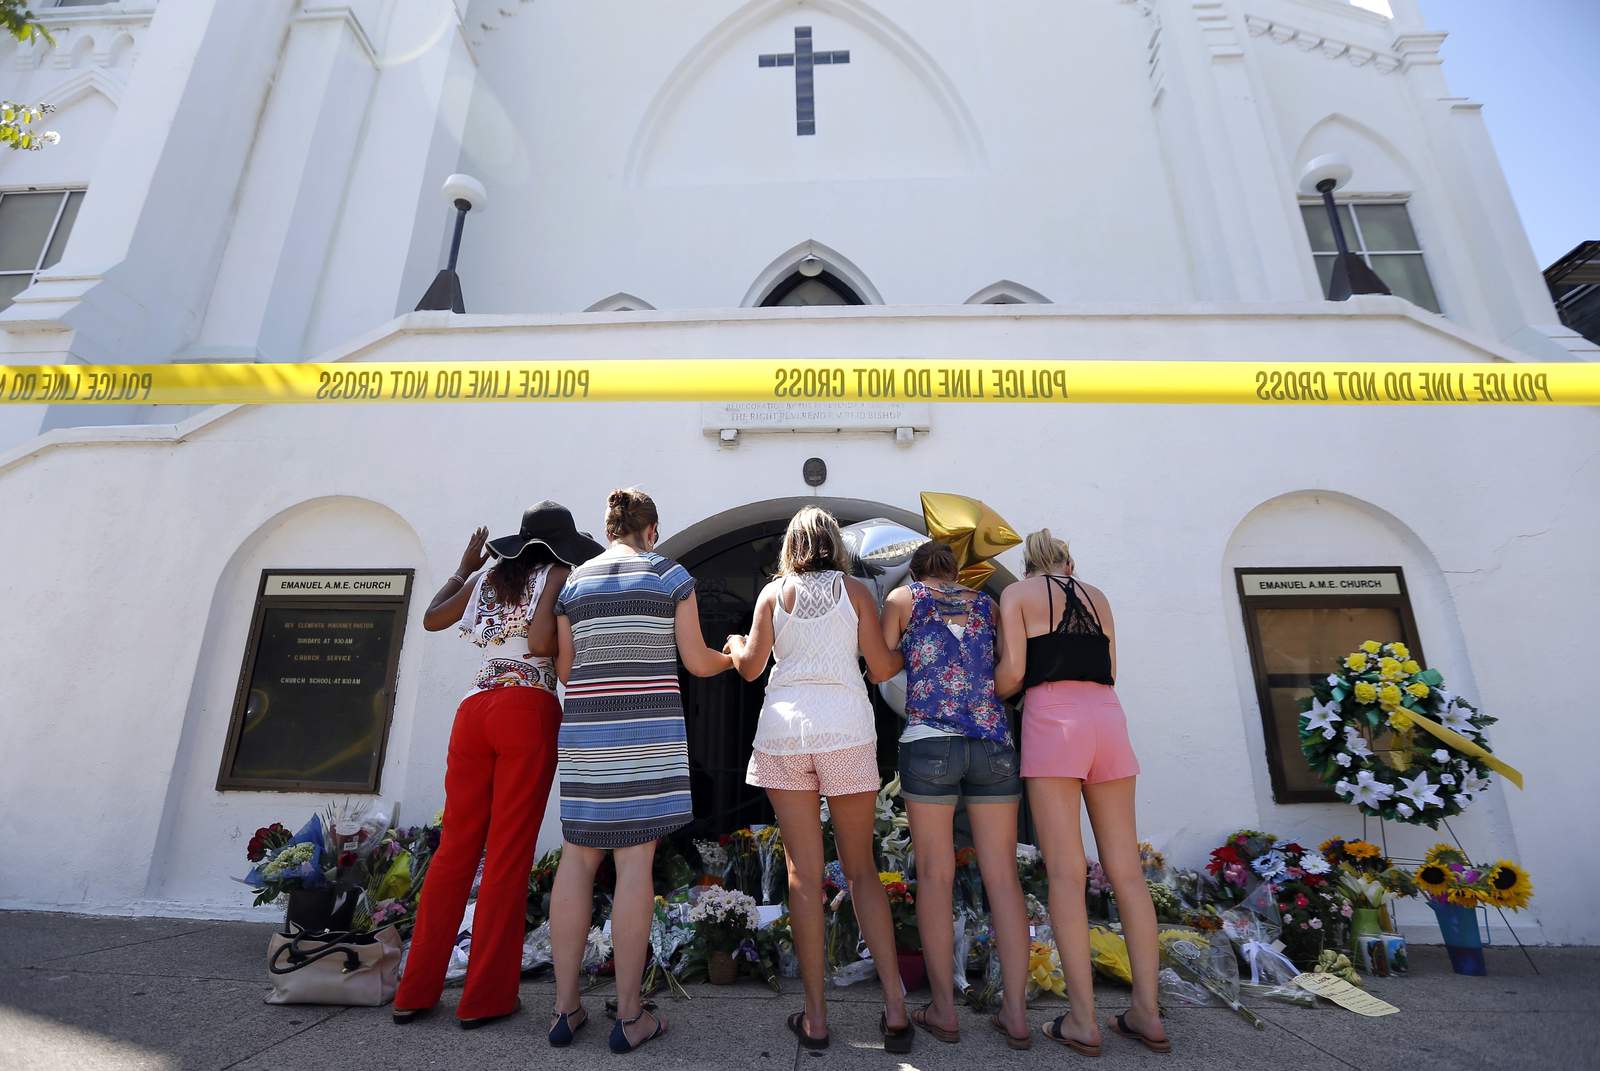 5 years after church massacre, S Carolina protects monuments